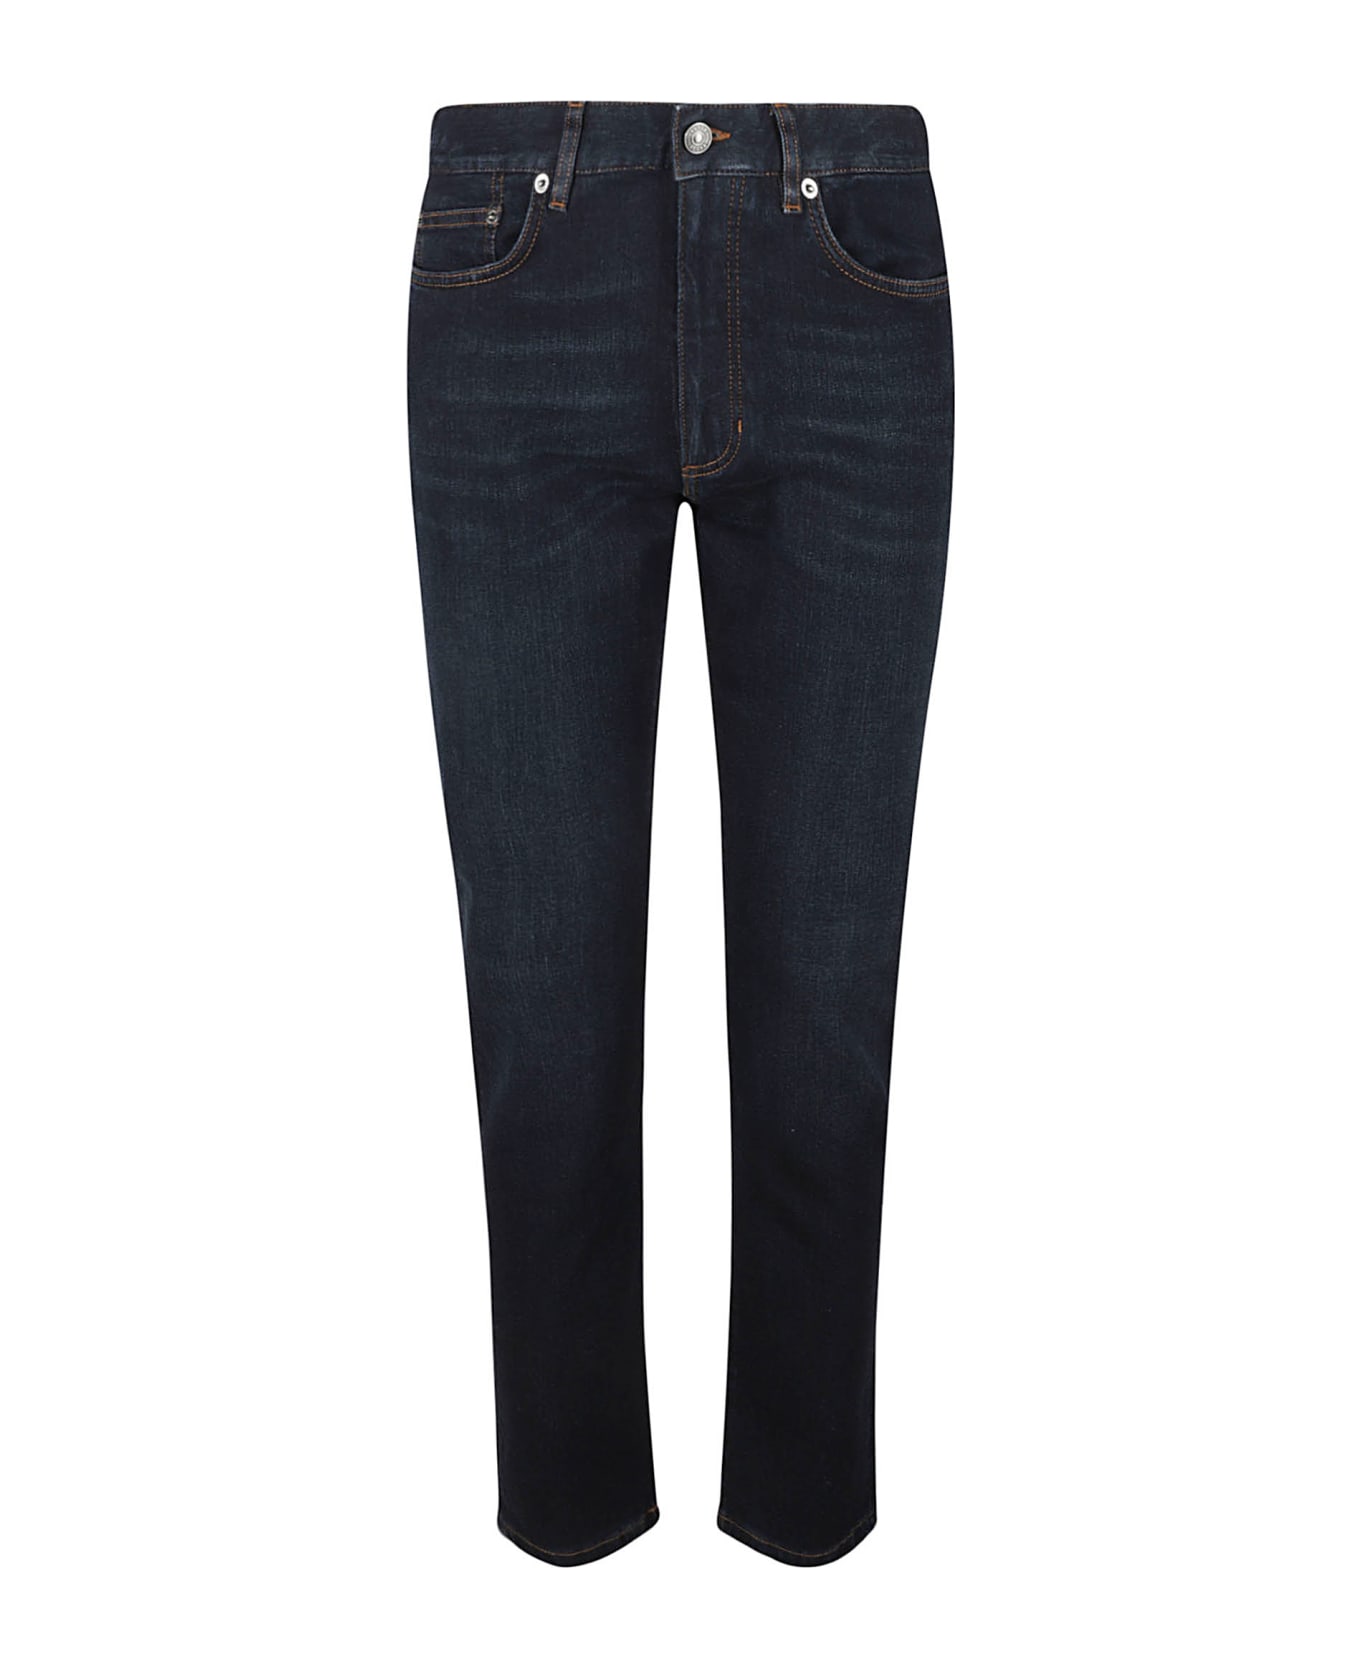 Zegna City Button Fitted Jeans - Denim